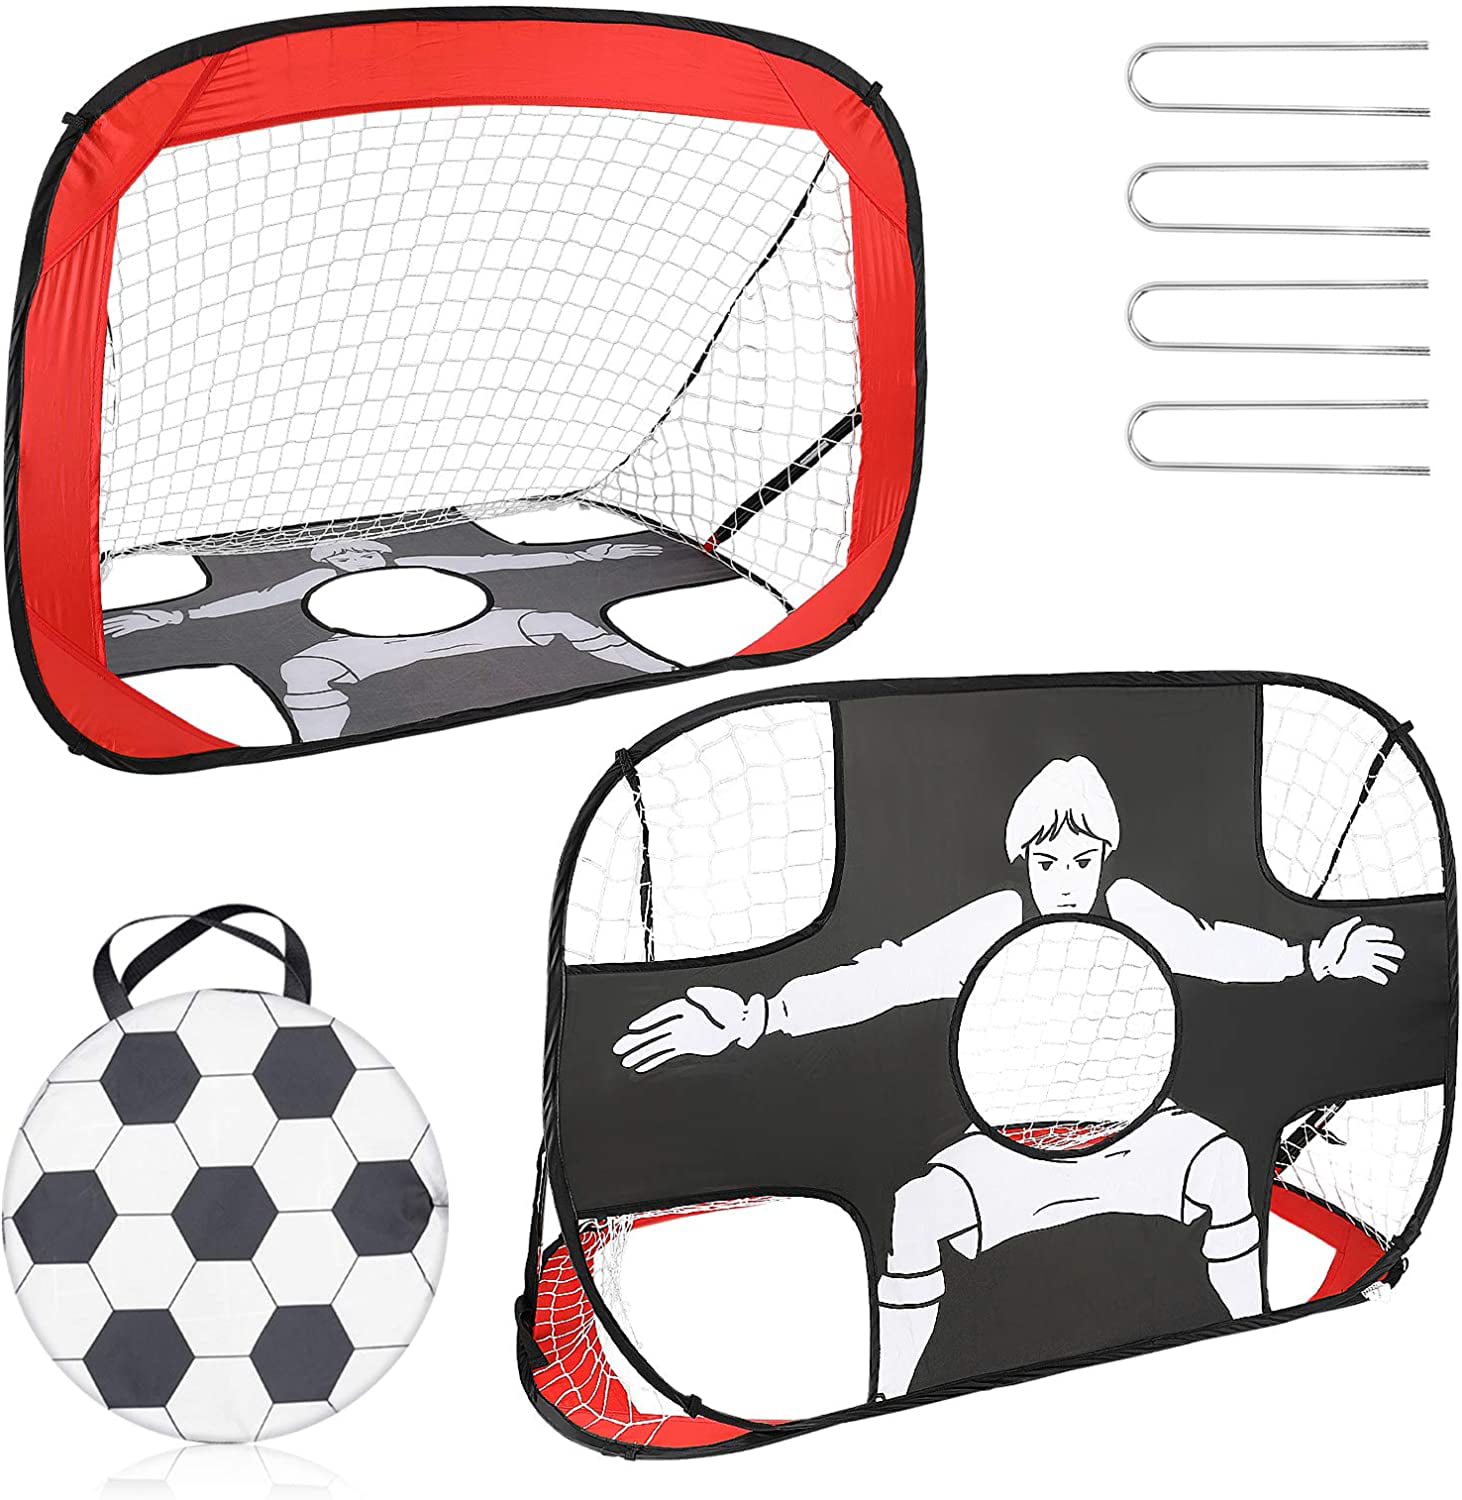 2 in 1 Portable Pop-up Soccer Goal Portable Soccer Goal for Kids Collapsible Football Training Kit Soccer Goals Net with Aim Target and Carry Bag for Indoor/Outdoor Shooting Practice Goal 